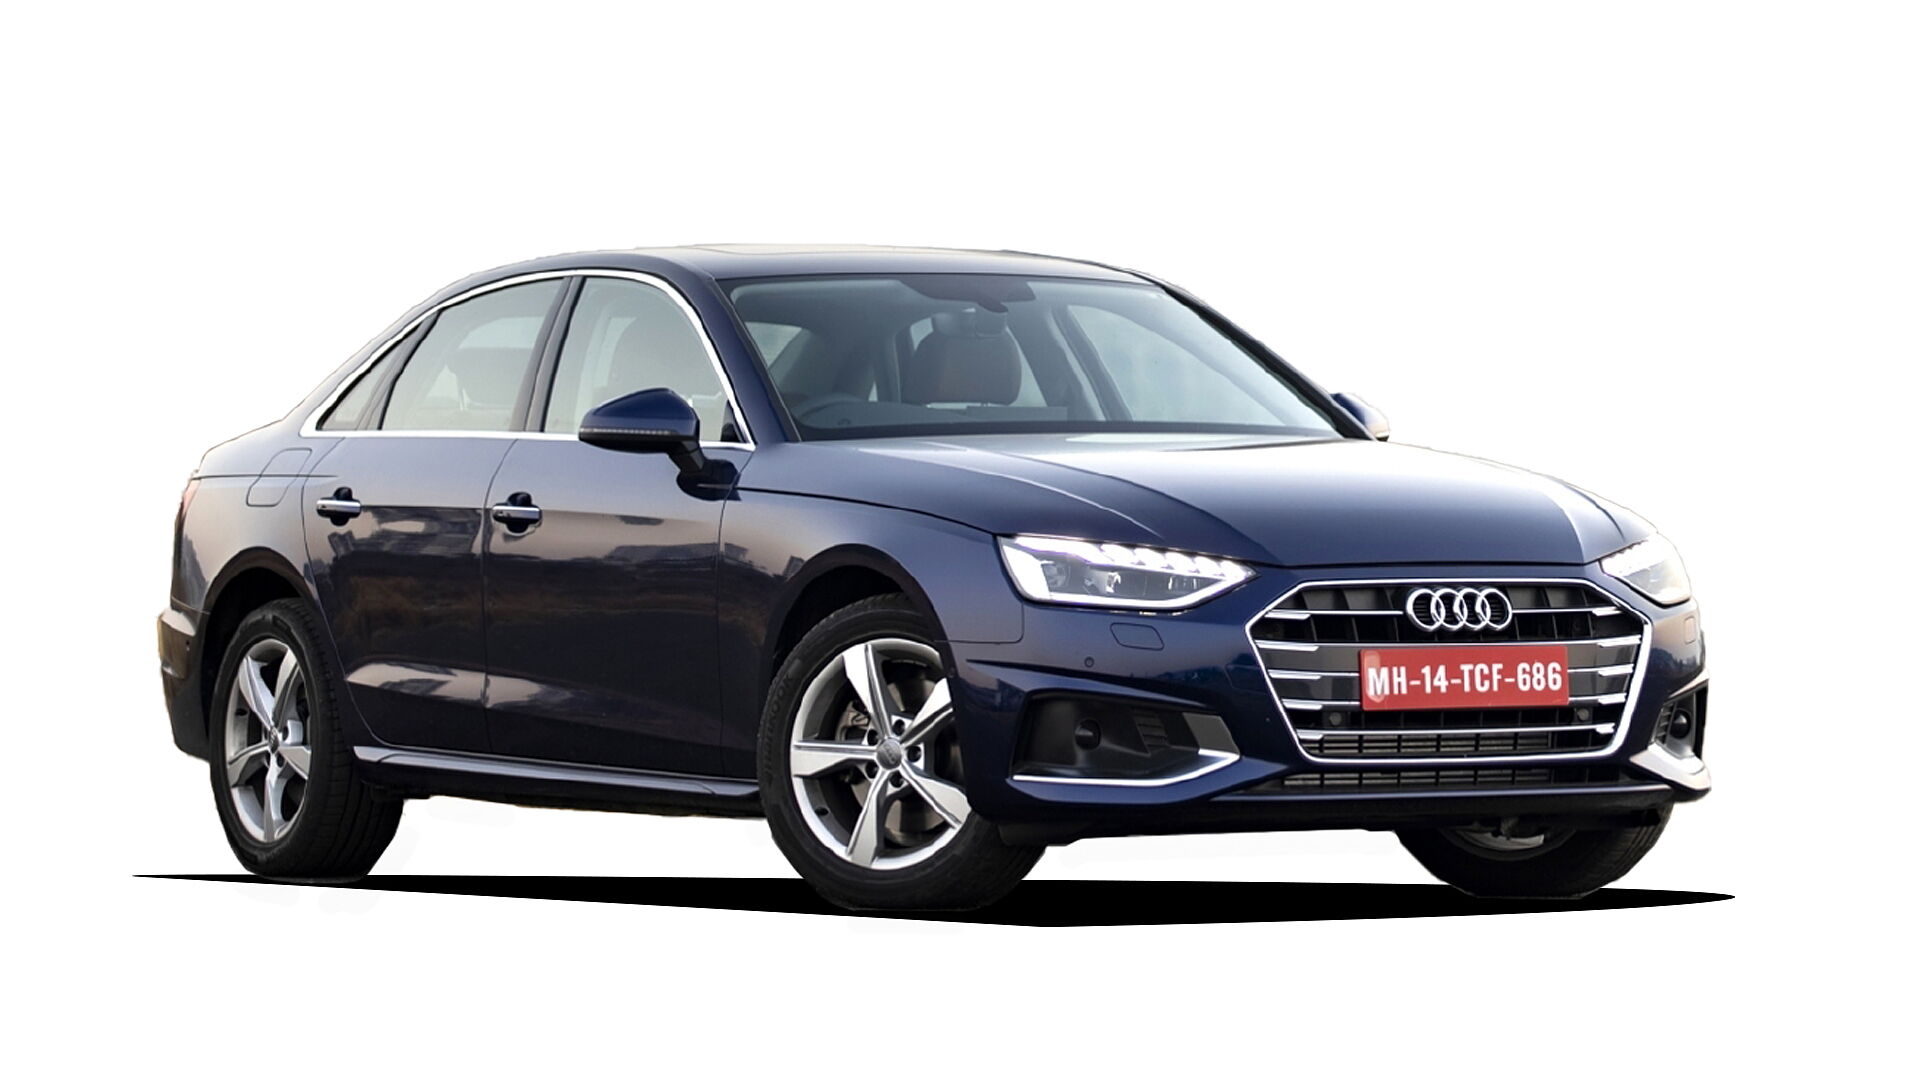 1998 Audi A4 Price, Value, Ratings & Reviews